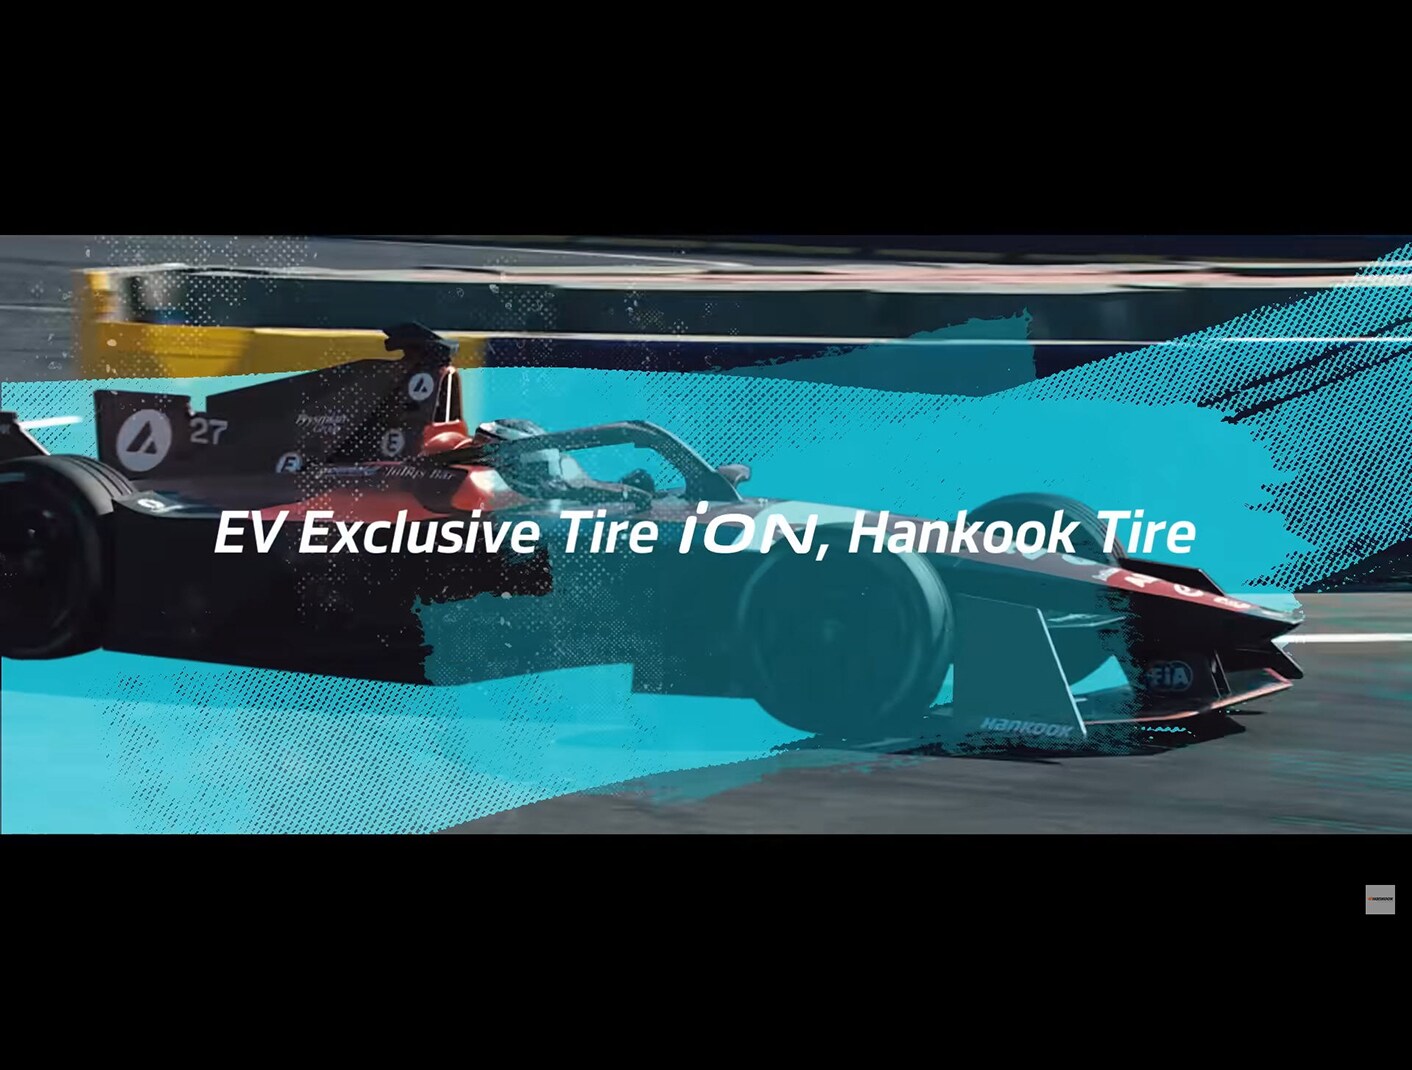 [Hankook Tire] Hankook Tire X Formula E, Electrify Your Driving Emotion_iON ver. (30s)